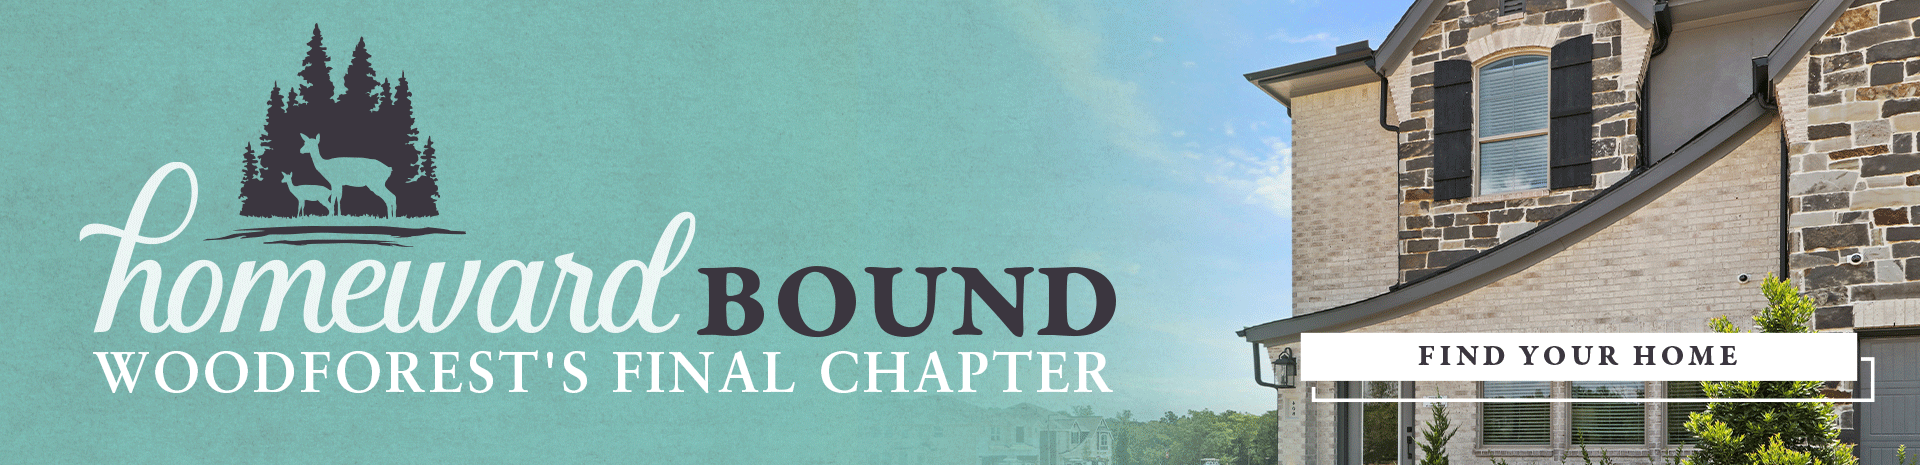 Homeward Bound - Final Opportunities to Buy New Homes in Woodforest. Learn more.